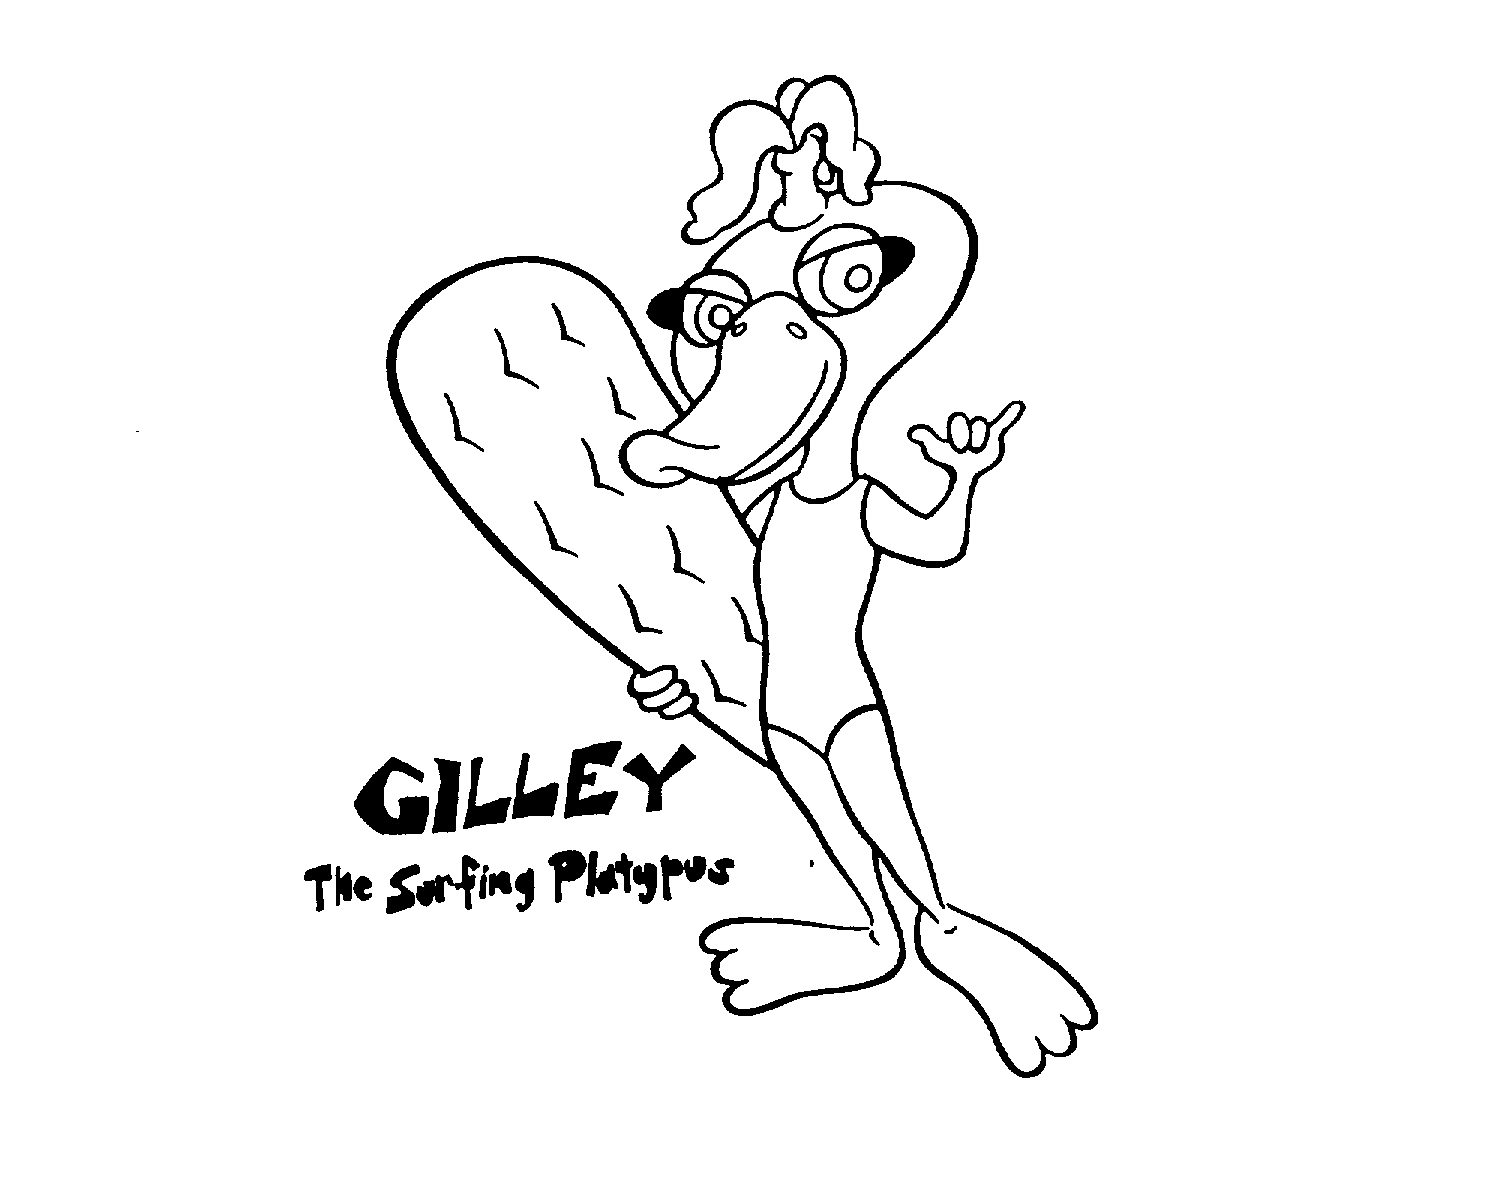  GILLEY THE SURFING PLATYPUS